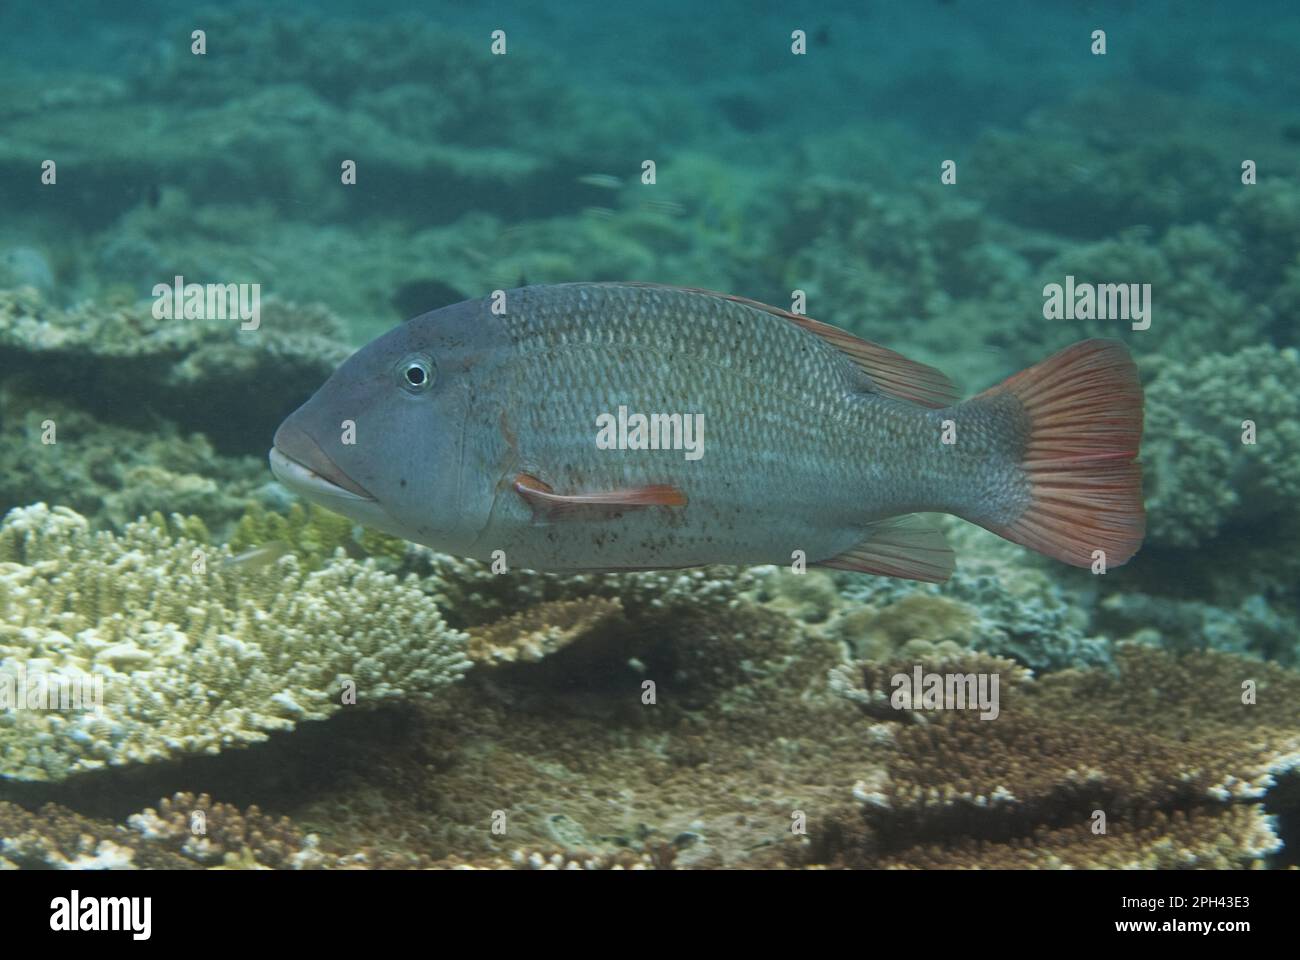 Big-headed snapper, Other animals, Fish, Perch-like, Animals, Orange-spotted emperor (Lethrinus erythracanthus) adult, swimming over reef, Sipadan Stock Photo